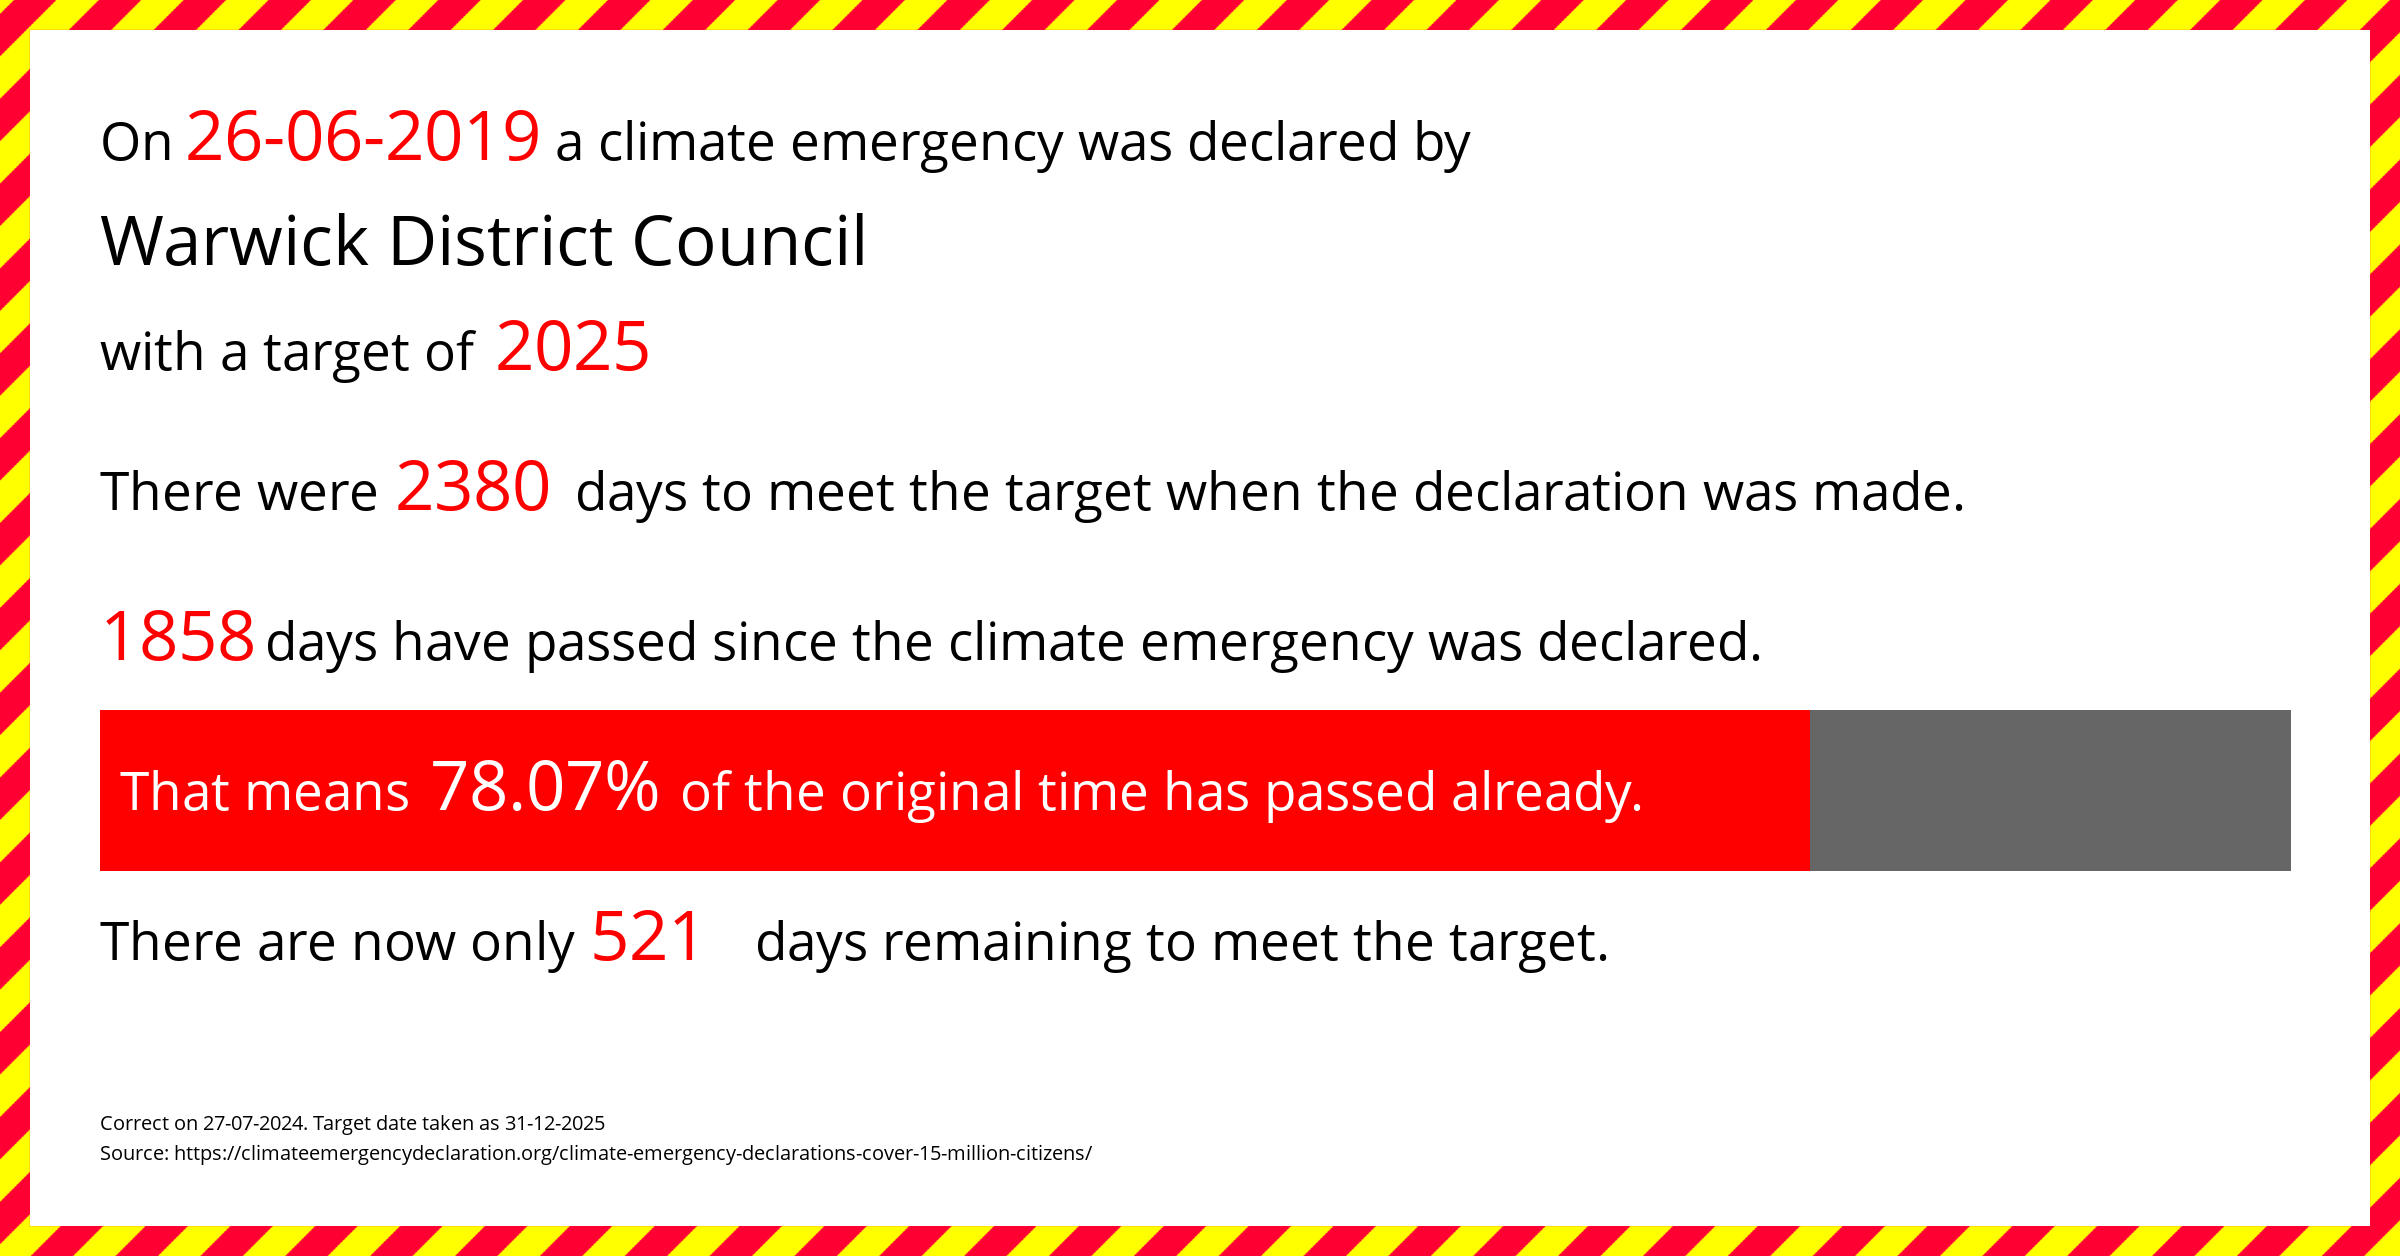 Warwick District Council declared a Climate emergency on Wednesday 26th June 2019, with a target of 2025.